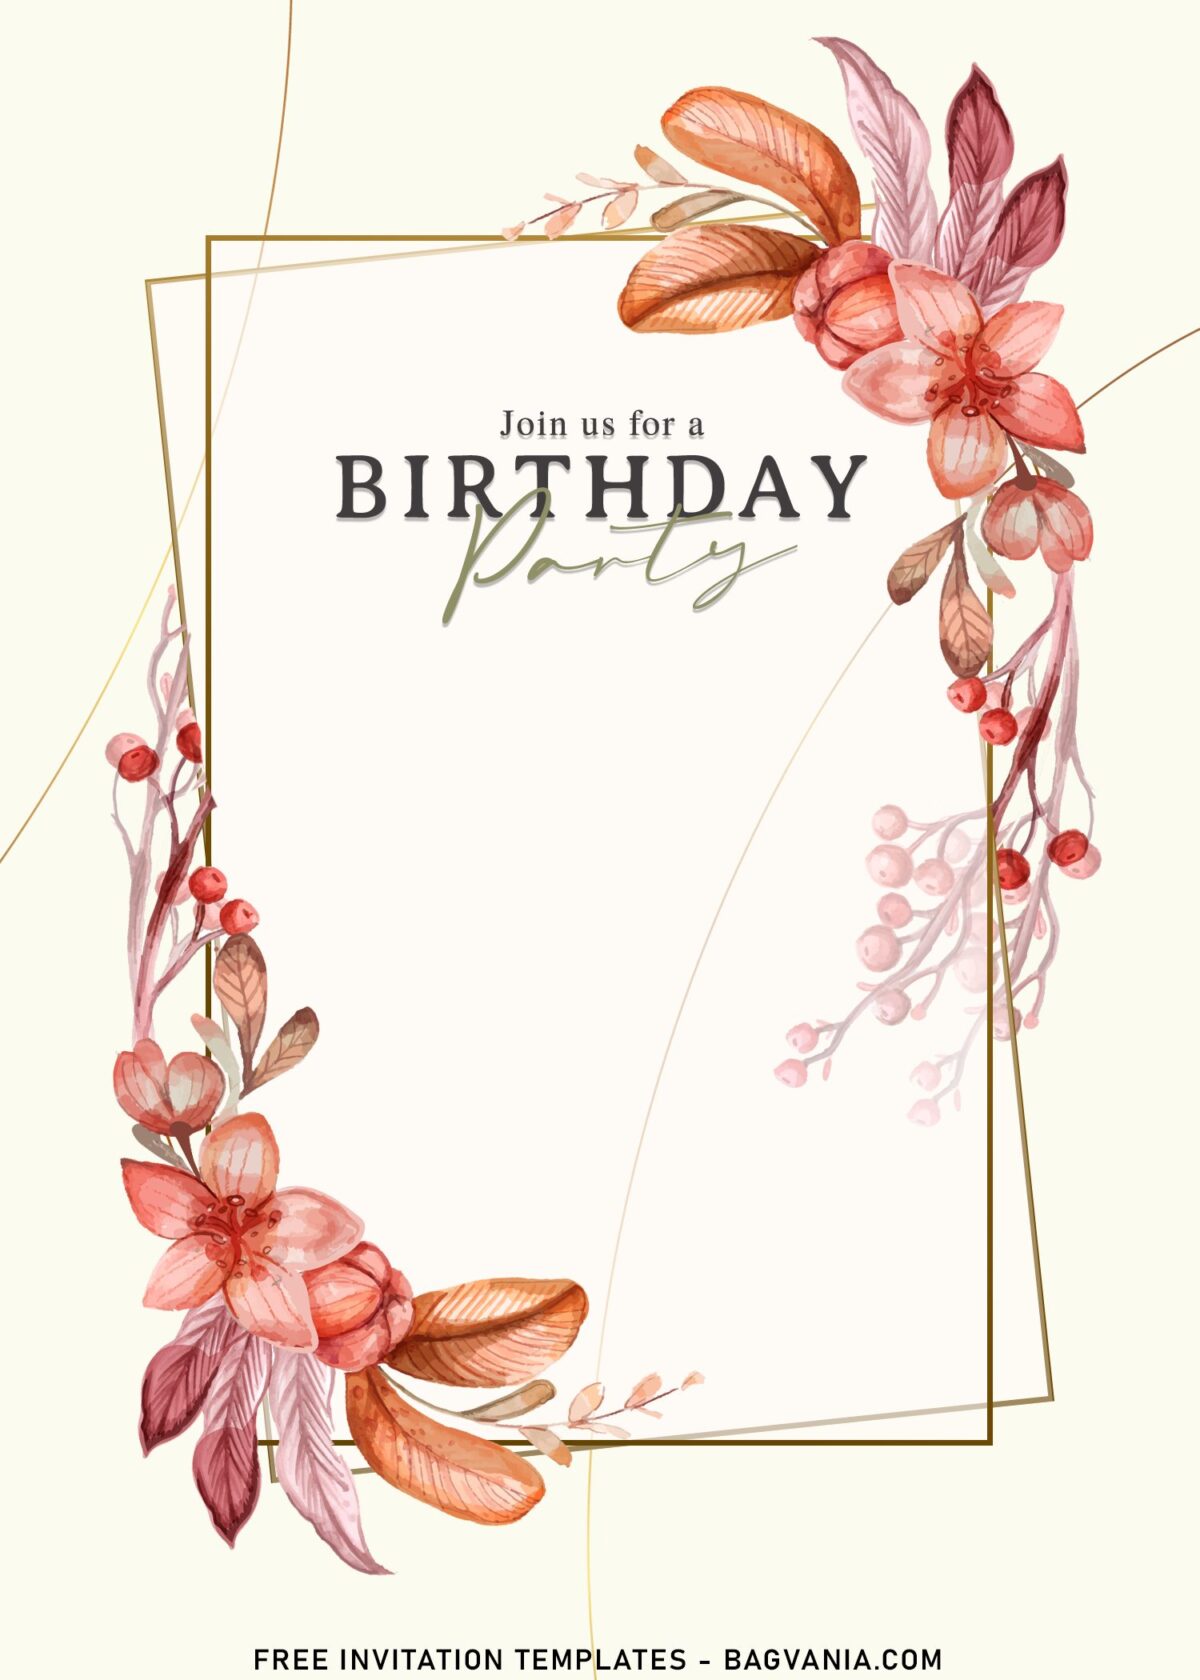 11+ Chic Foliage Invitation Templates For Your Big Day With garden roses